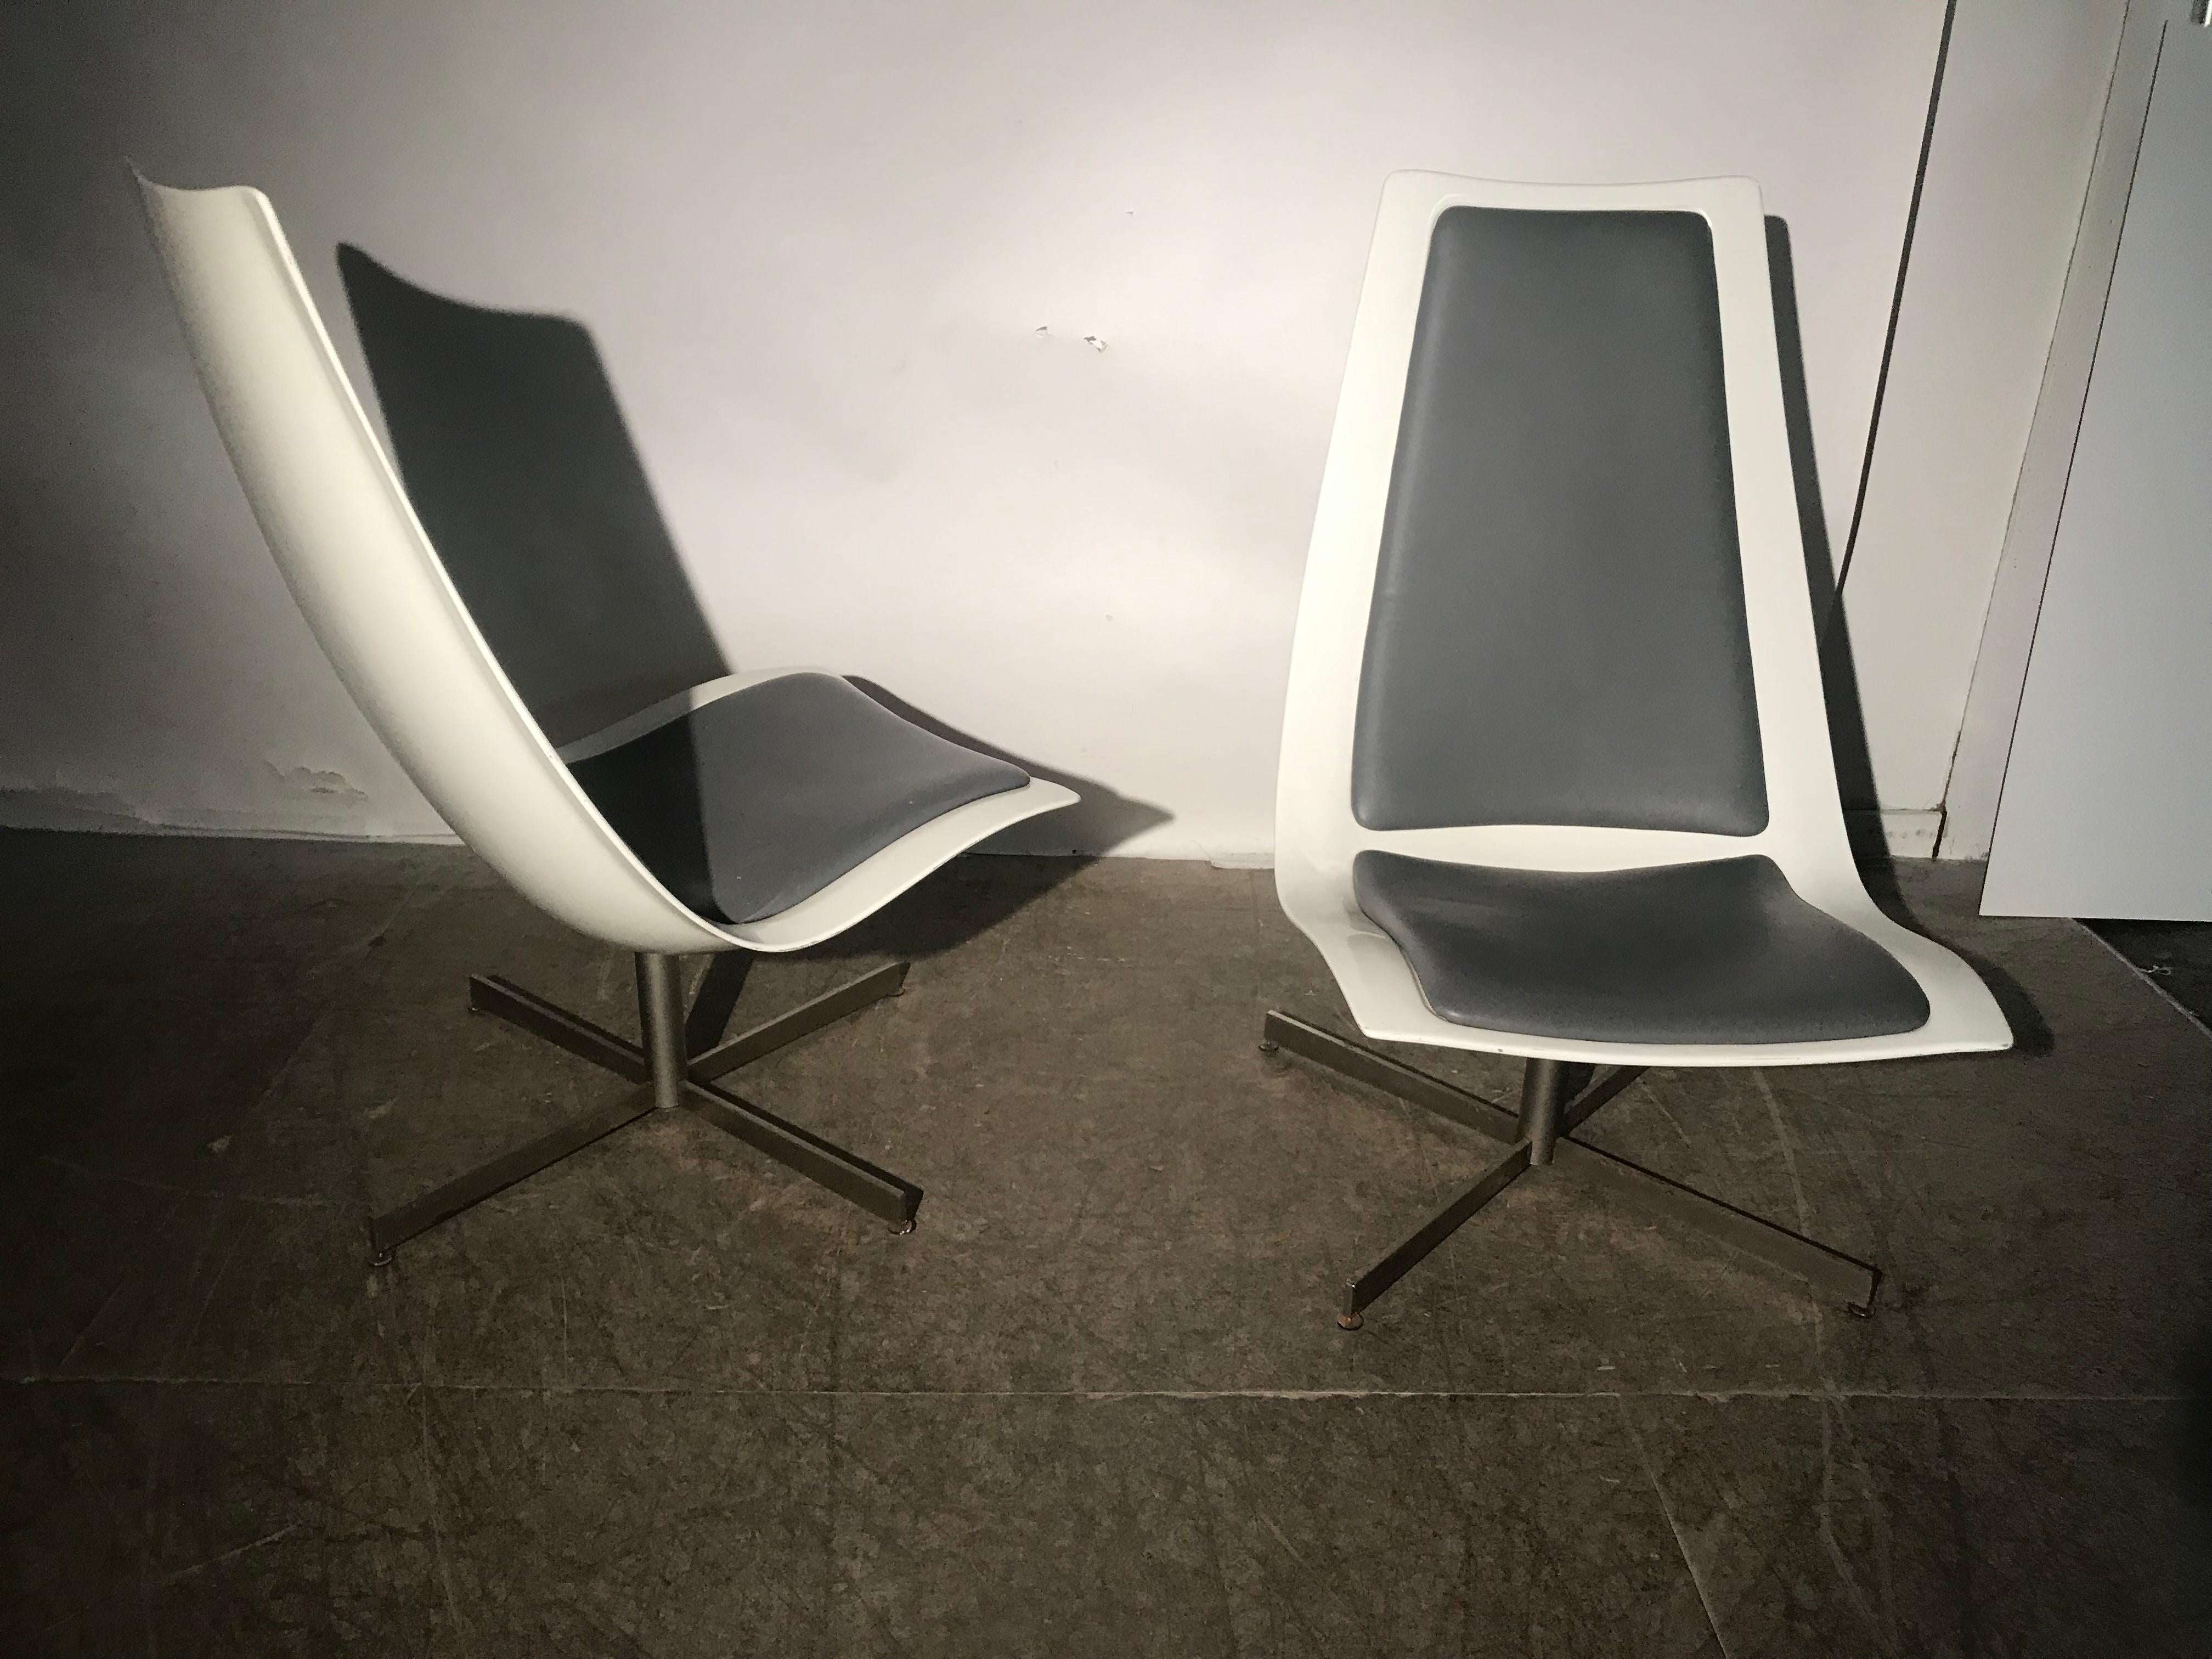 Mid-20th Century Pair of Space Age High Back Fiberglass Swivel Chairs, Montreal Expo 67